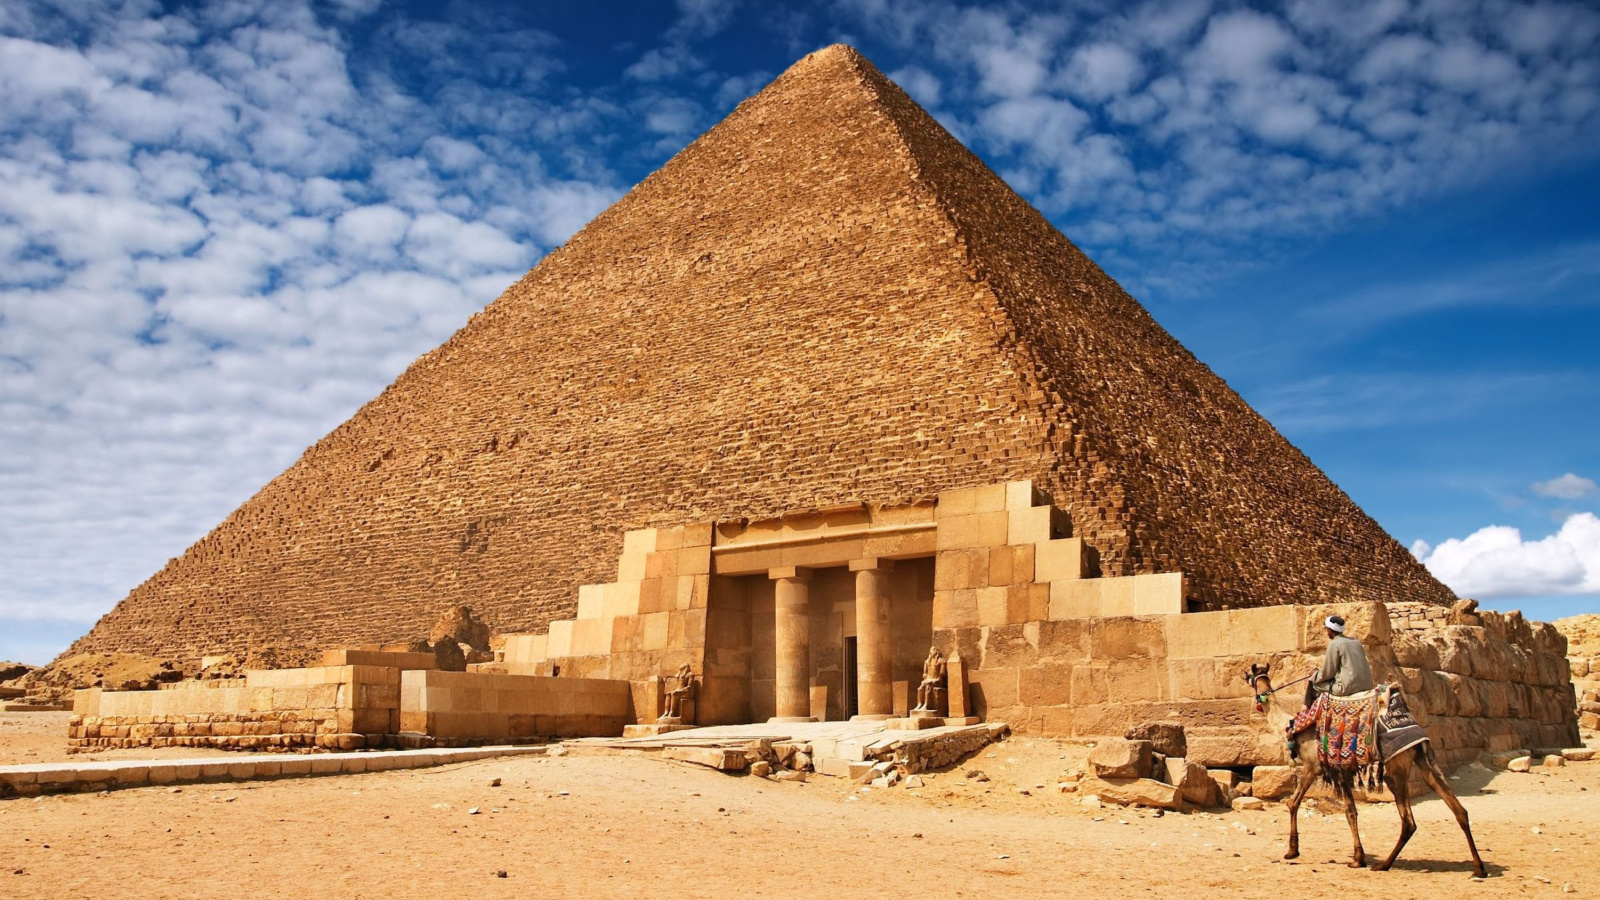 Great Pyramid of Giza in Egypt wallpaper 1600x900